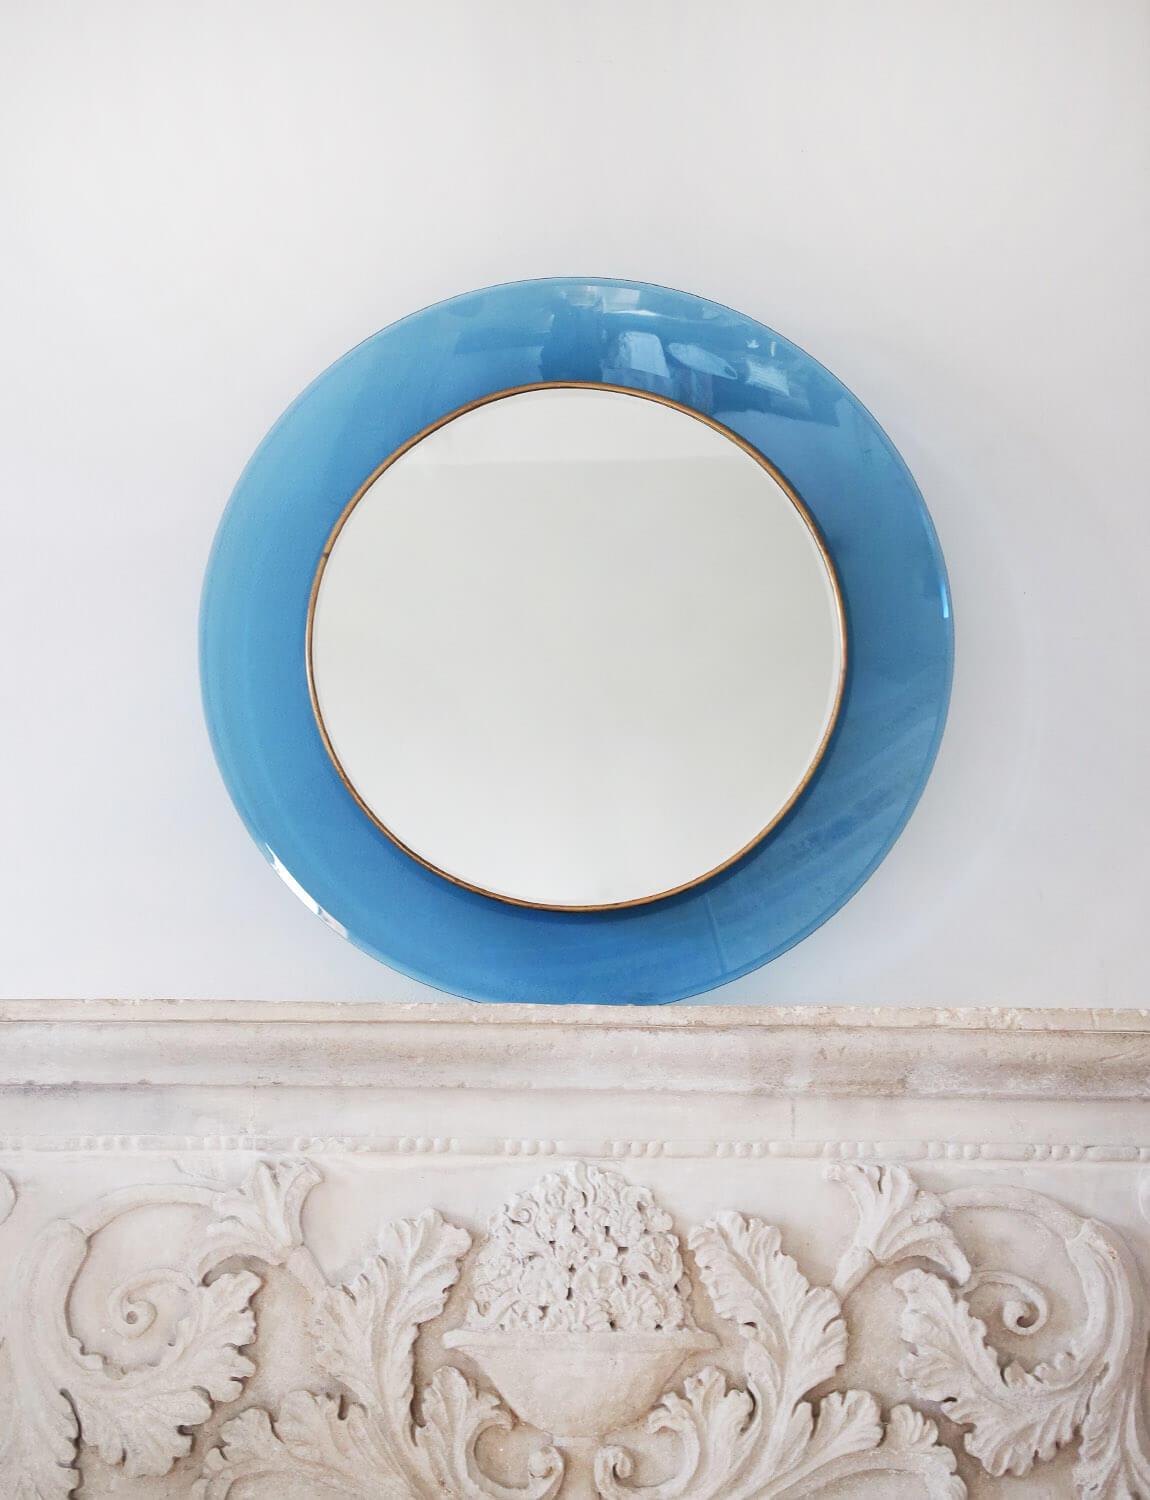 A stunning and rare example of a deep blue circular glass mirror designed by Max Ingrand and made by Fontana Arte in 1966. The mirror is surrounded by a concave glass frame in deep blue. The model number for this historic design piece is 1669 and it